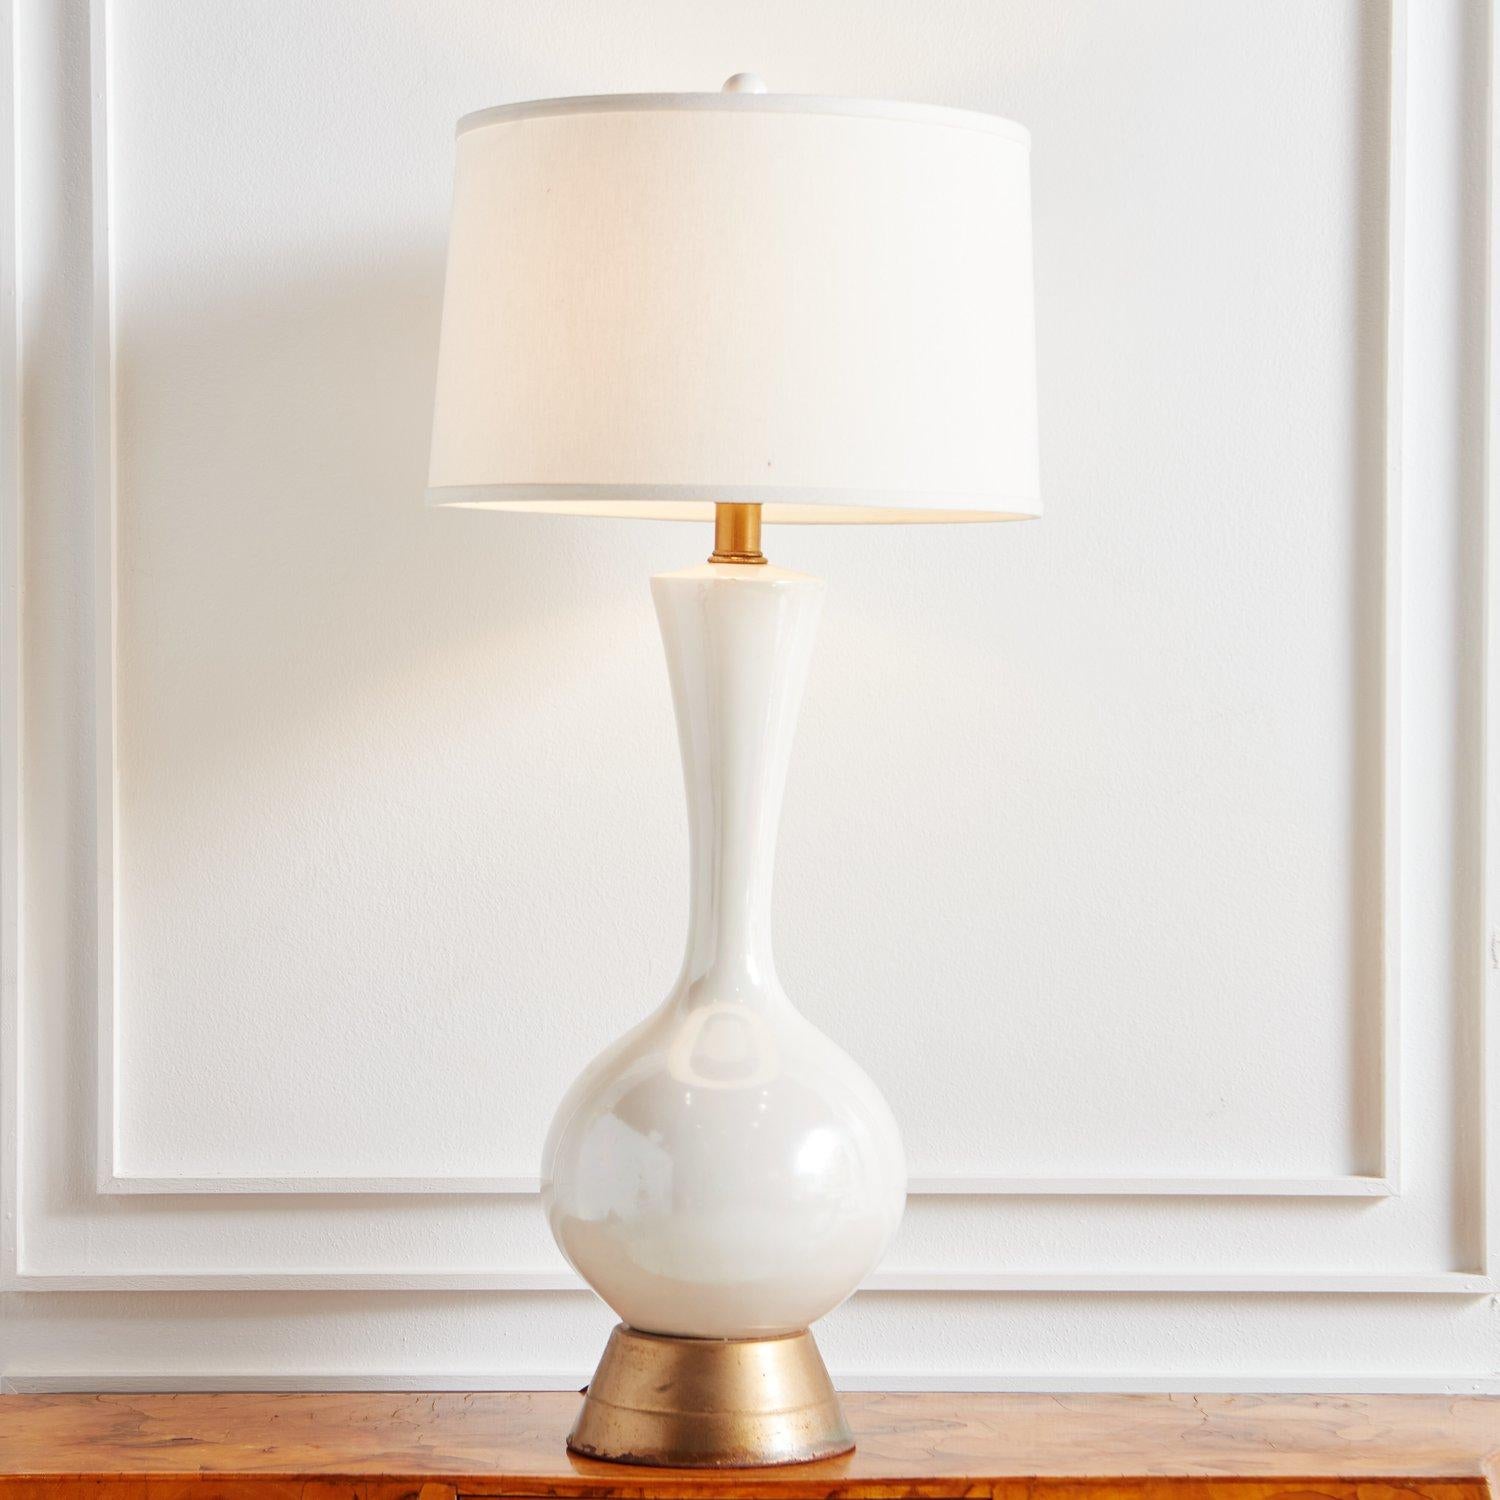 A tall, handblown glass table lamp featuring a curved body in a stunning opalescent hue. It has a tapered, circular brass pedestal base.